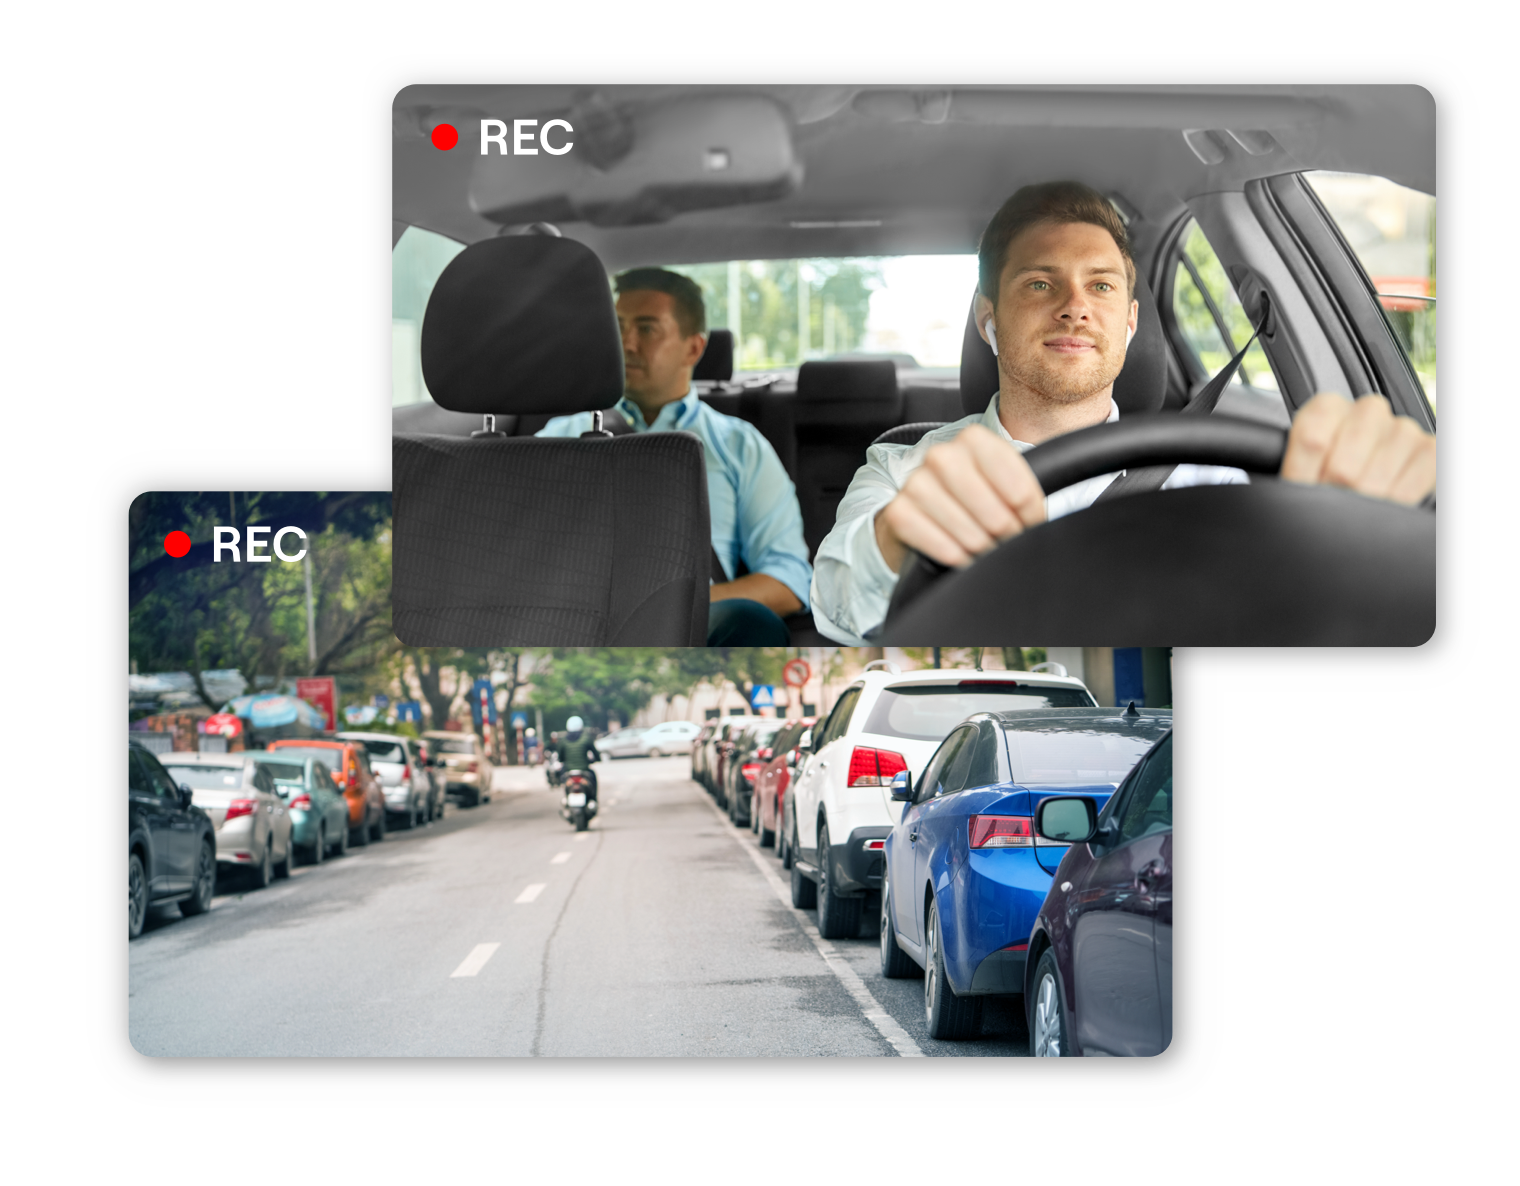 Nexar dash cam for rideshare drivers in NYC